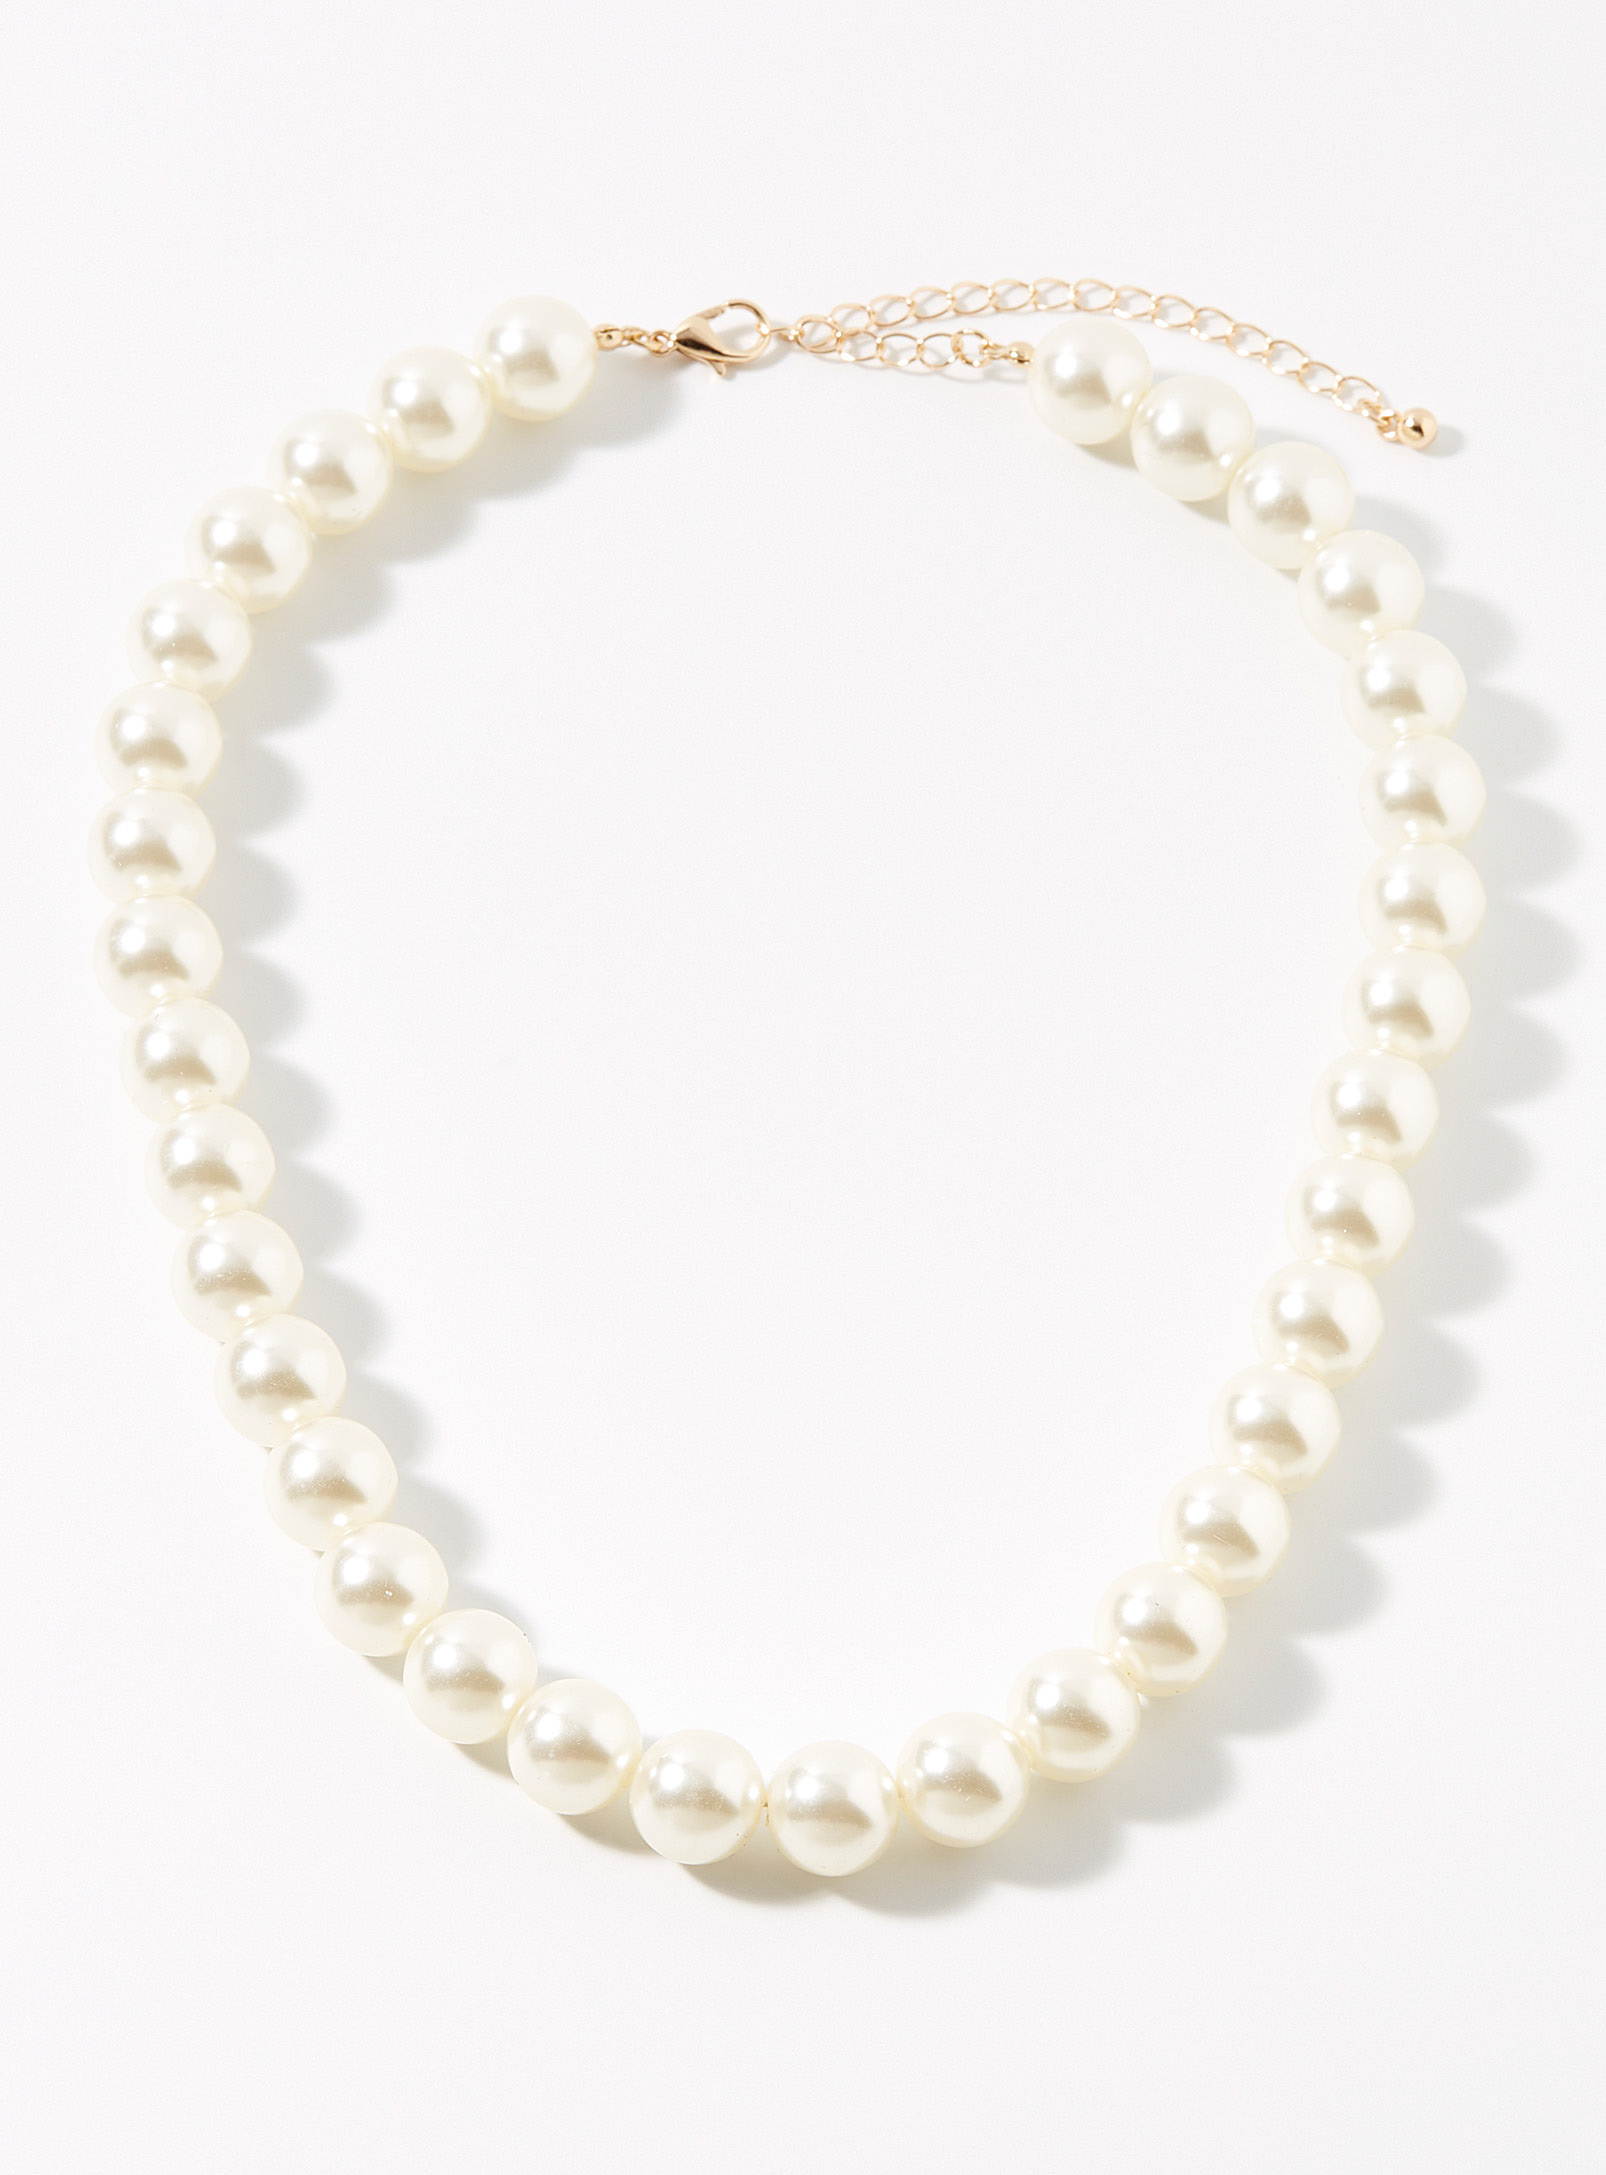 Simons - Women's Pearly bead statement necklace